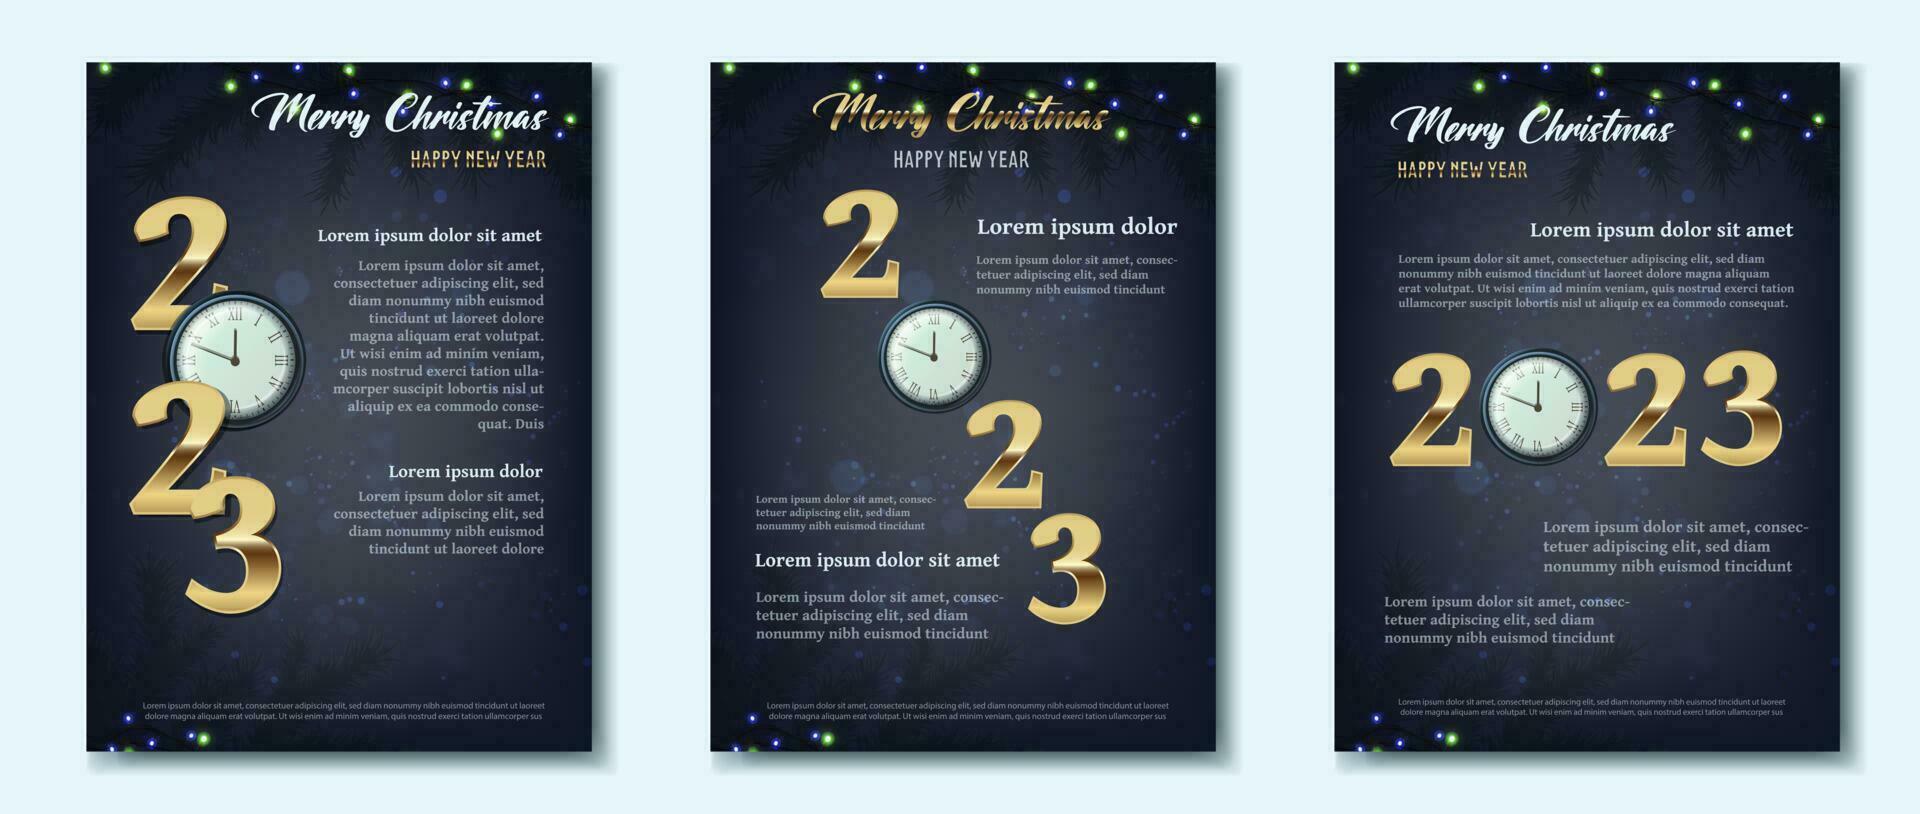 Happy New Year 2023. Merry Christmas. Template for greeting card, banner, flyer. vector